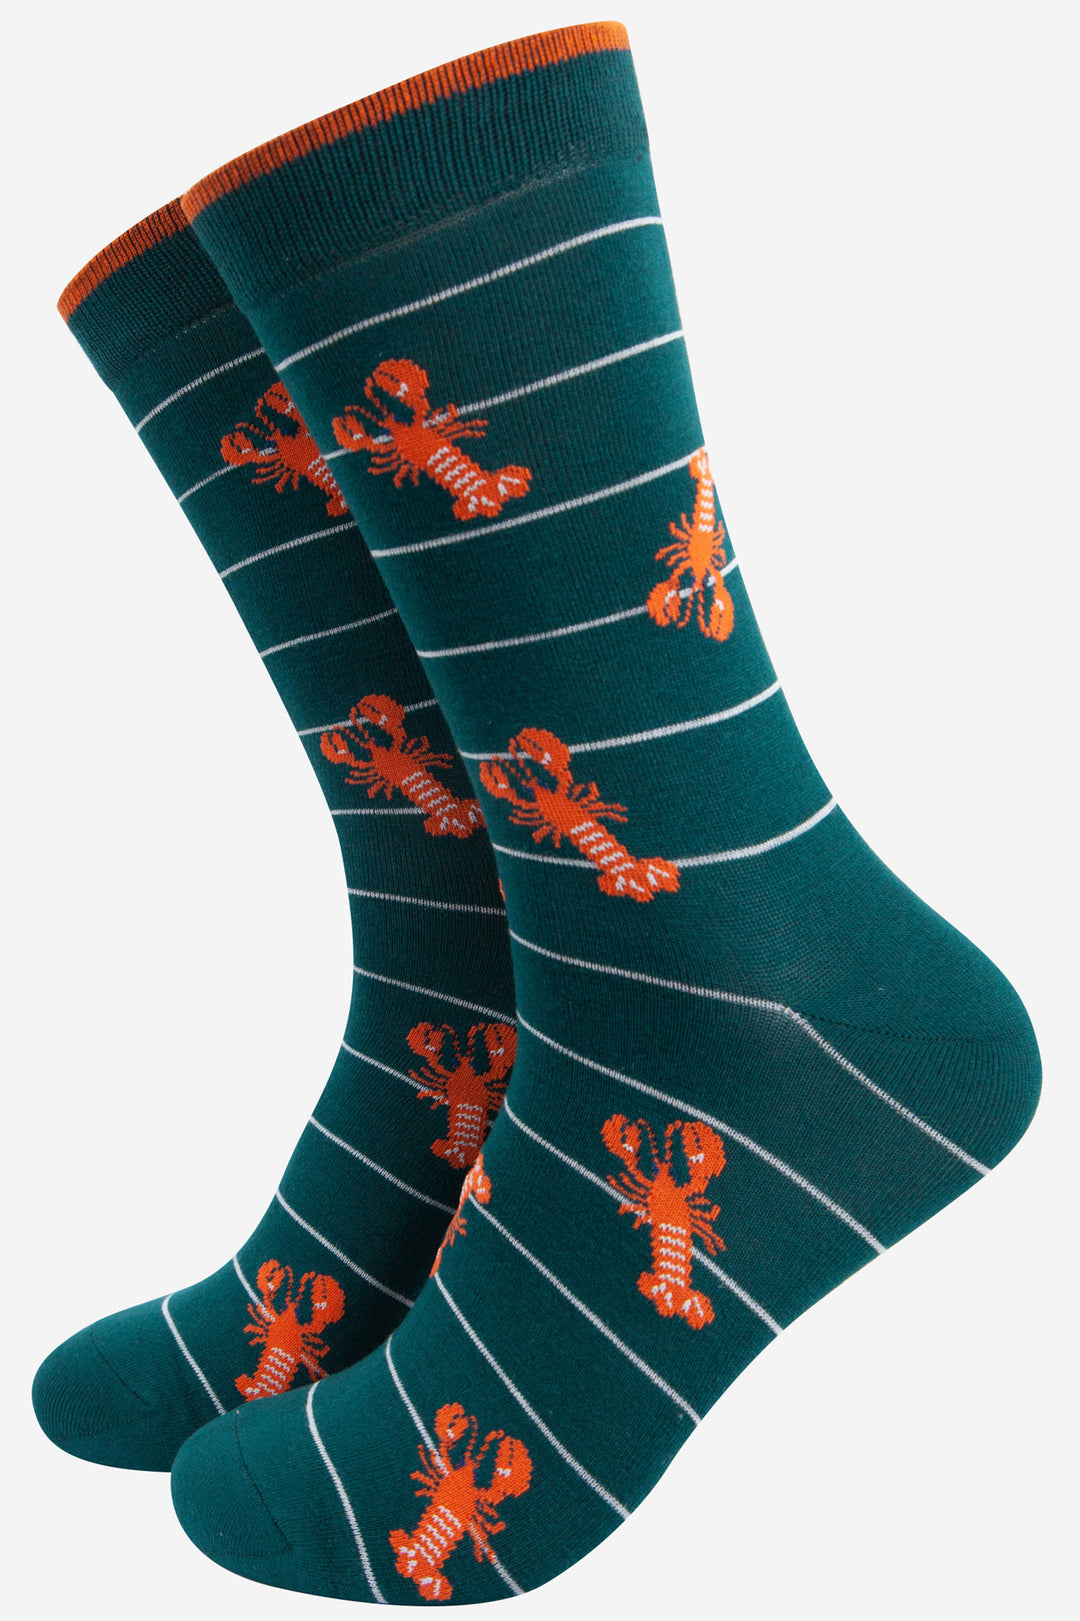 green striped bamboo socks with an all over lobster pattern